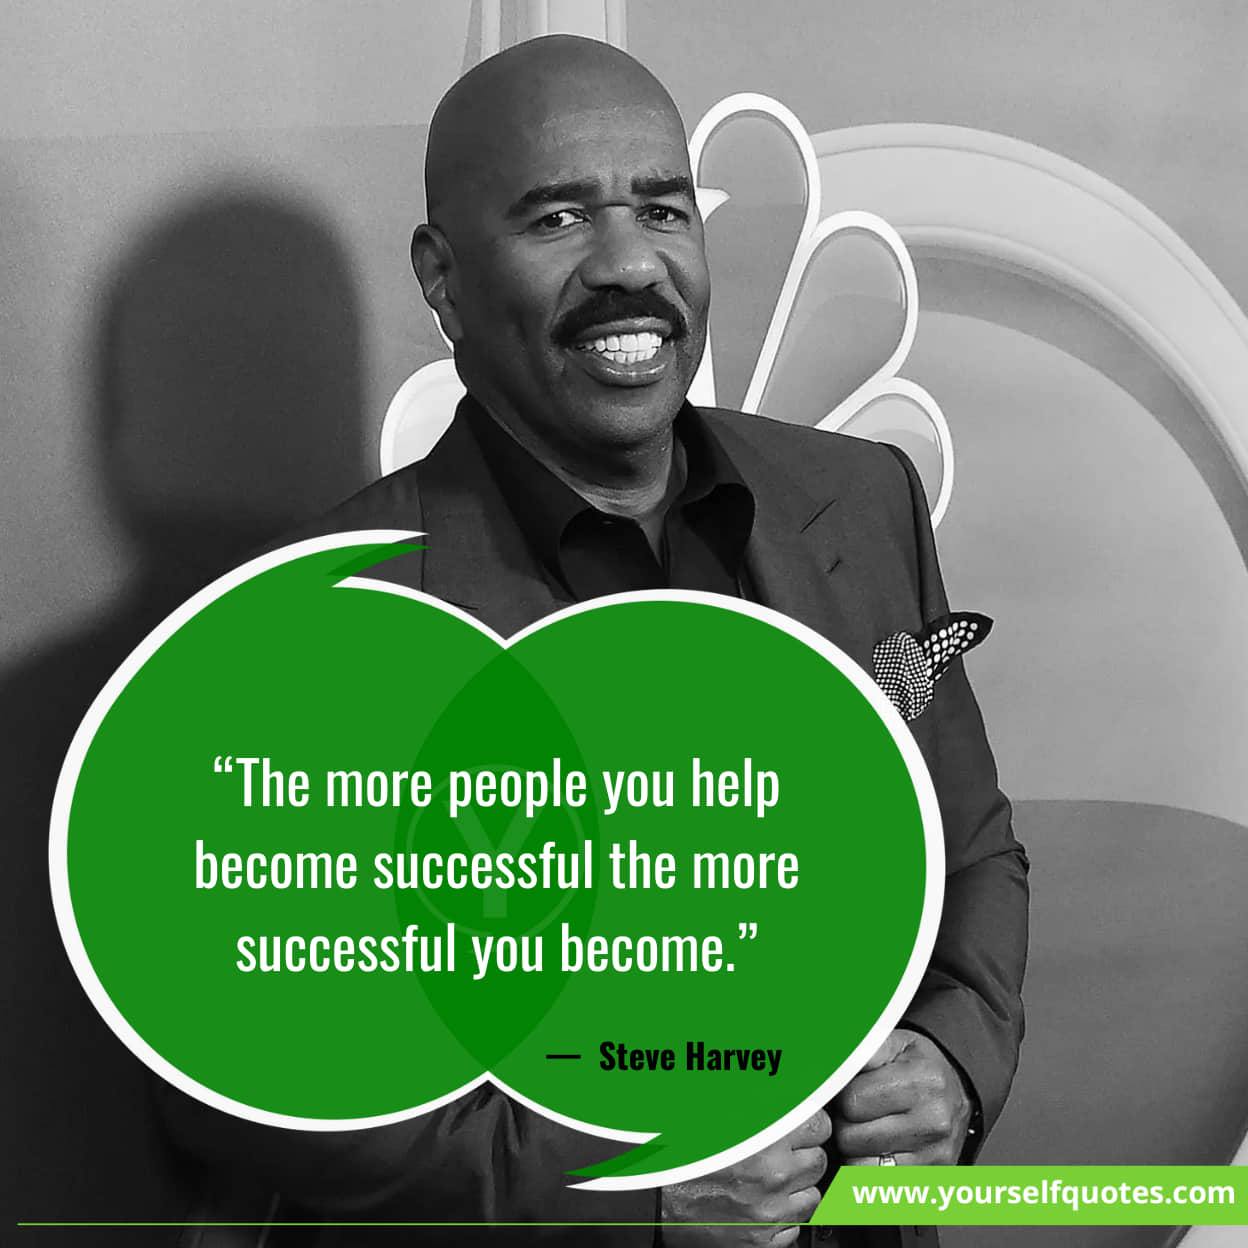 Best Steve Harvey Quotes On Helping Others